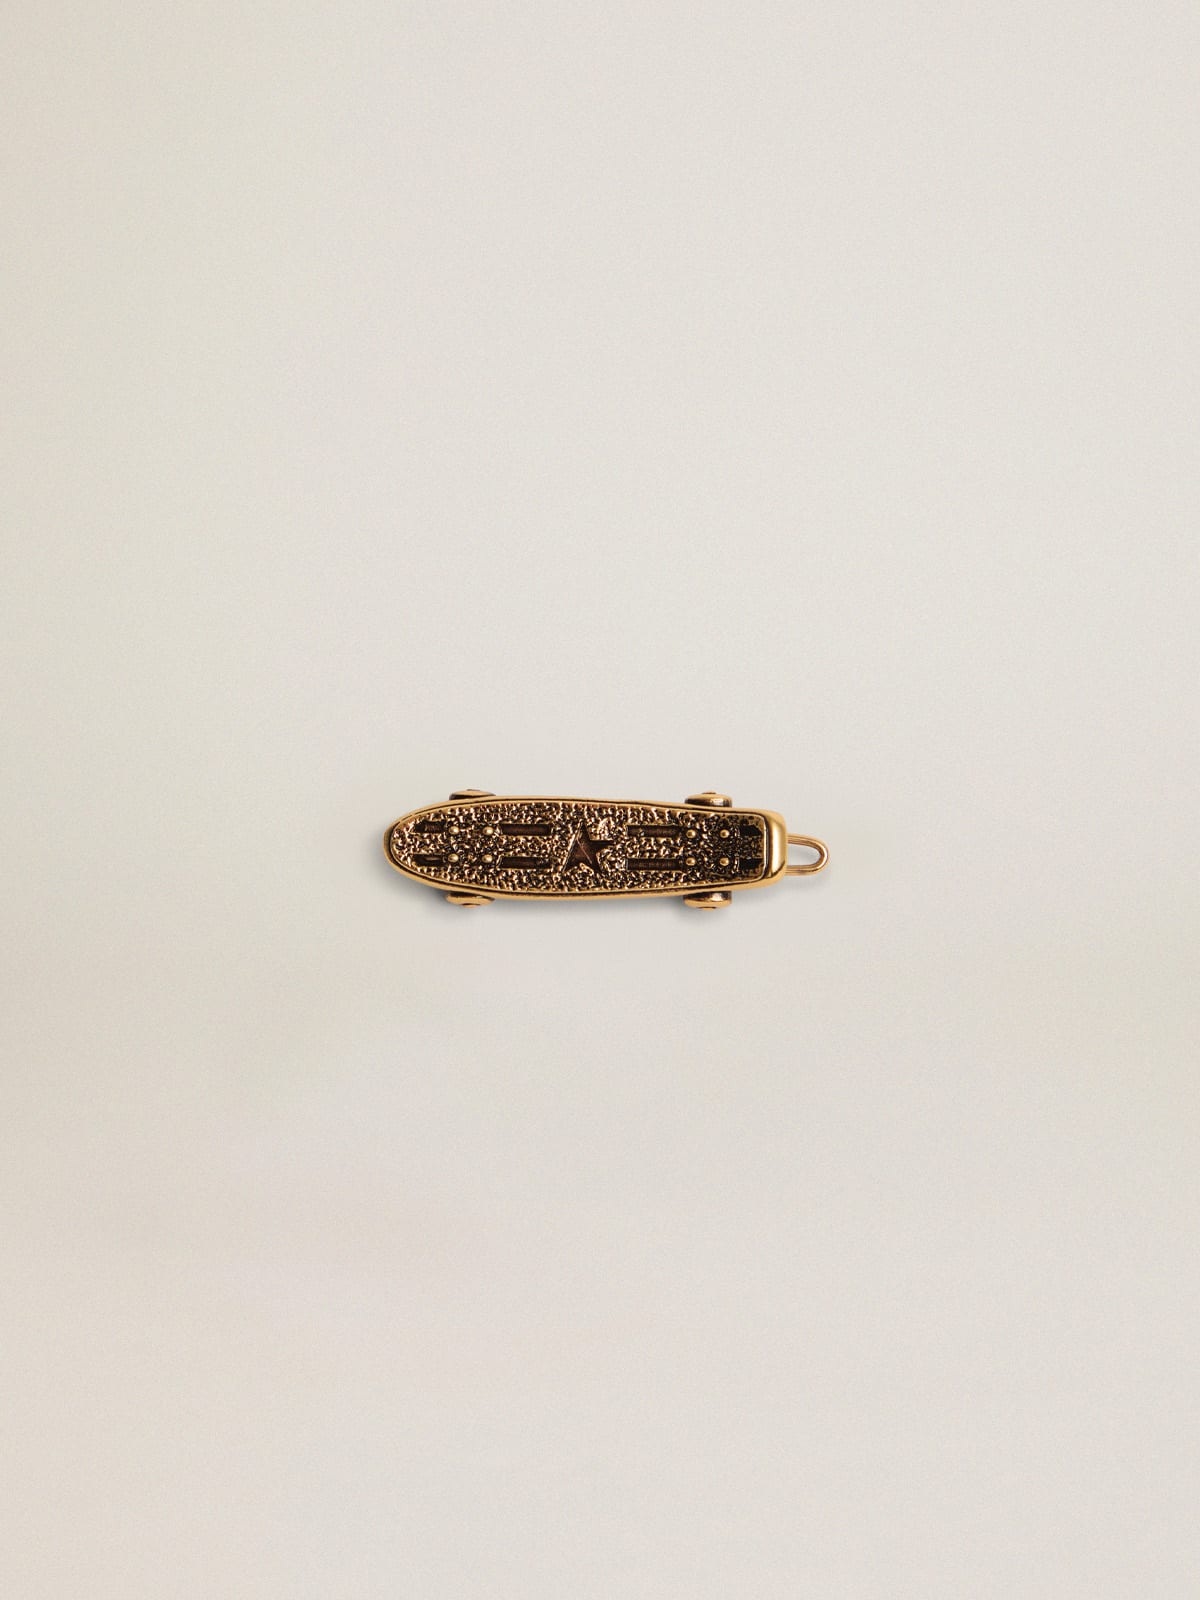 Golden Goose - Timeless Jewelmates Collection lace accessory in old gold color in the shape of a skateboard in 